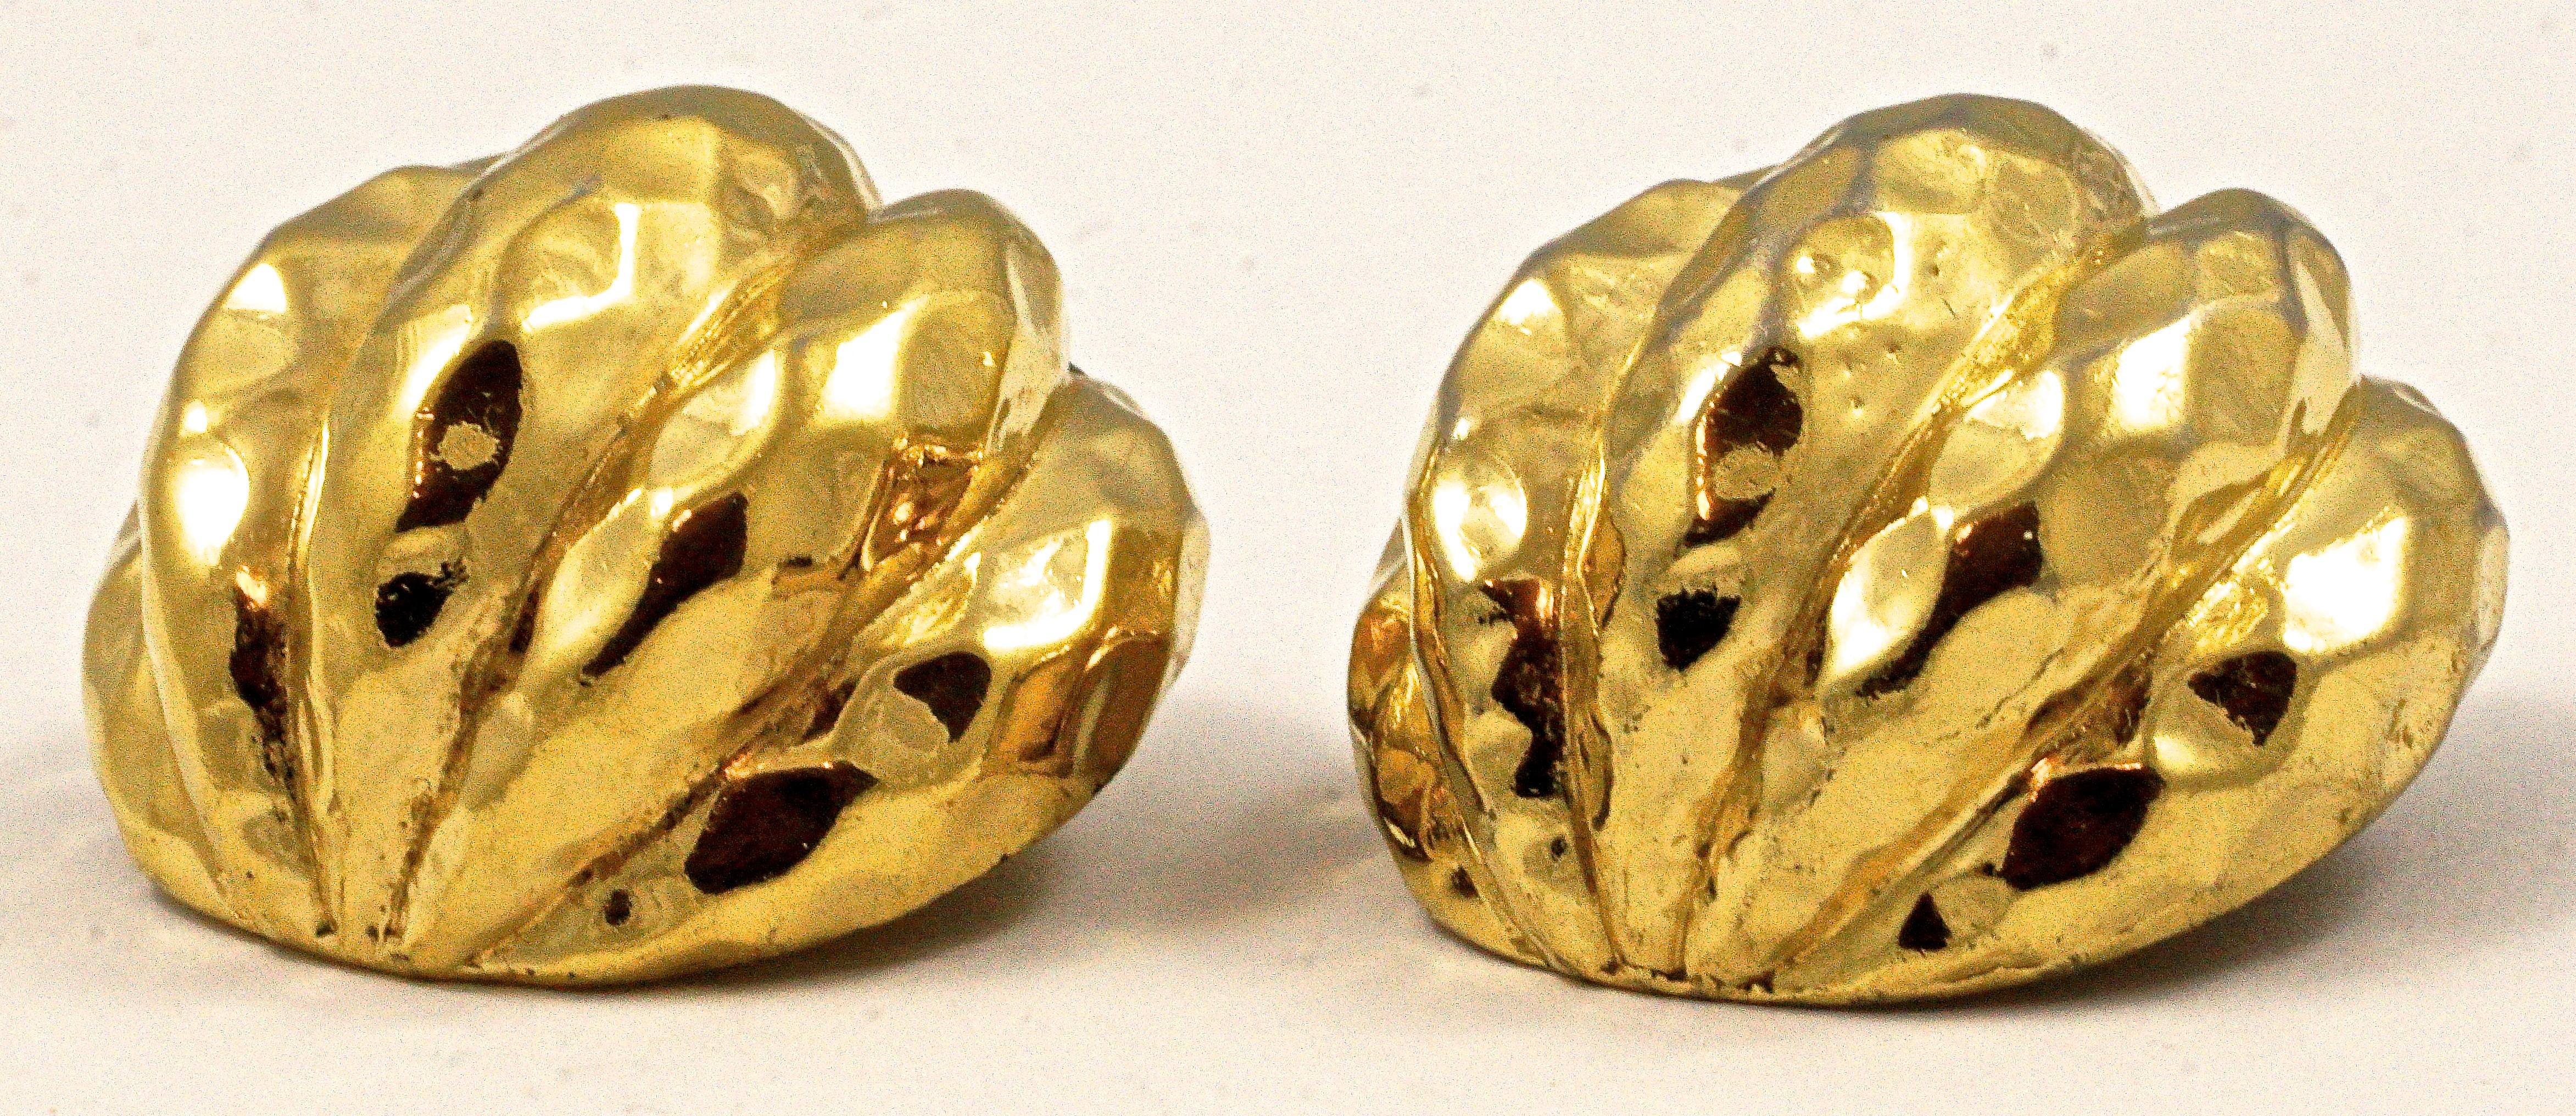 Women's or Men's Ciner Gold Plated Domed Clip On Earrings with a Ridged and Patterned Design For Sale